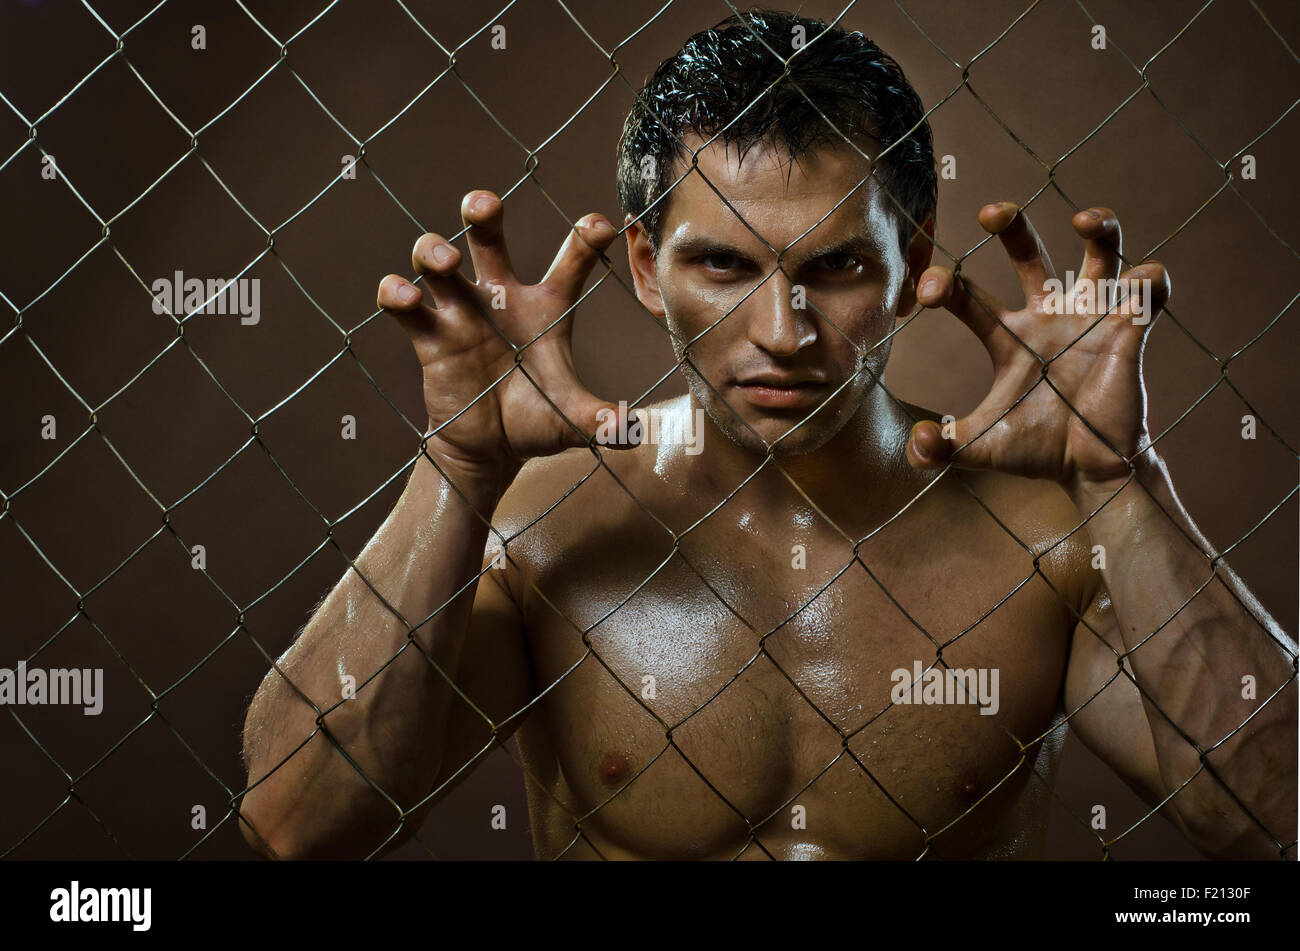 the very muscular handsome felon guy ,  out of netting   steel fence Stock Photo